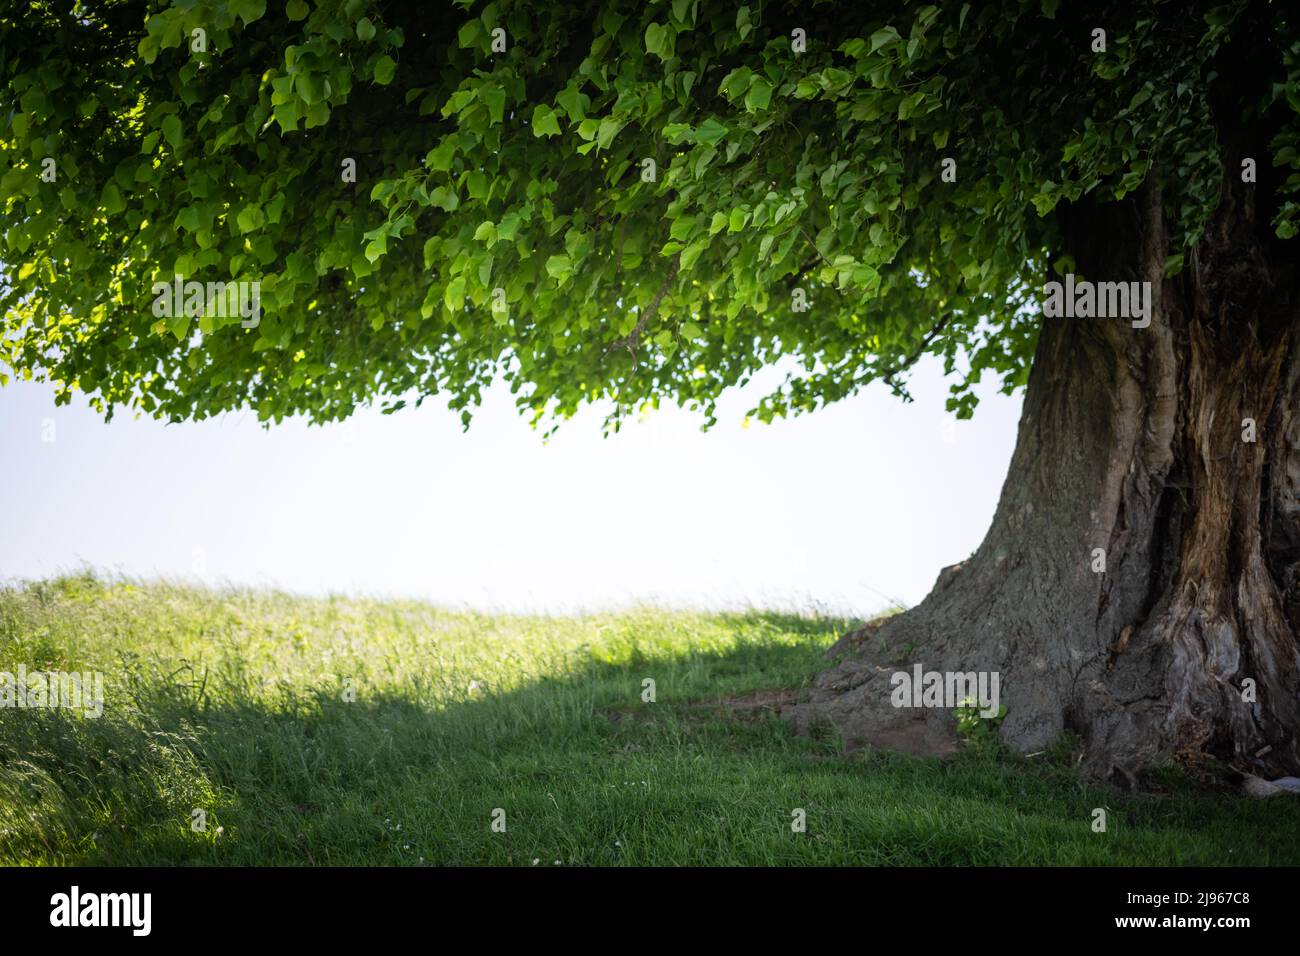 Old linden tree on summer meadow. Large tree crown with lush green foliage and thick trunk glowing by sunset light. Landscape photography Stock Photo